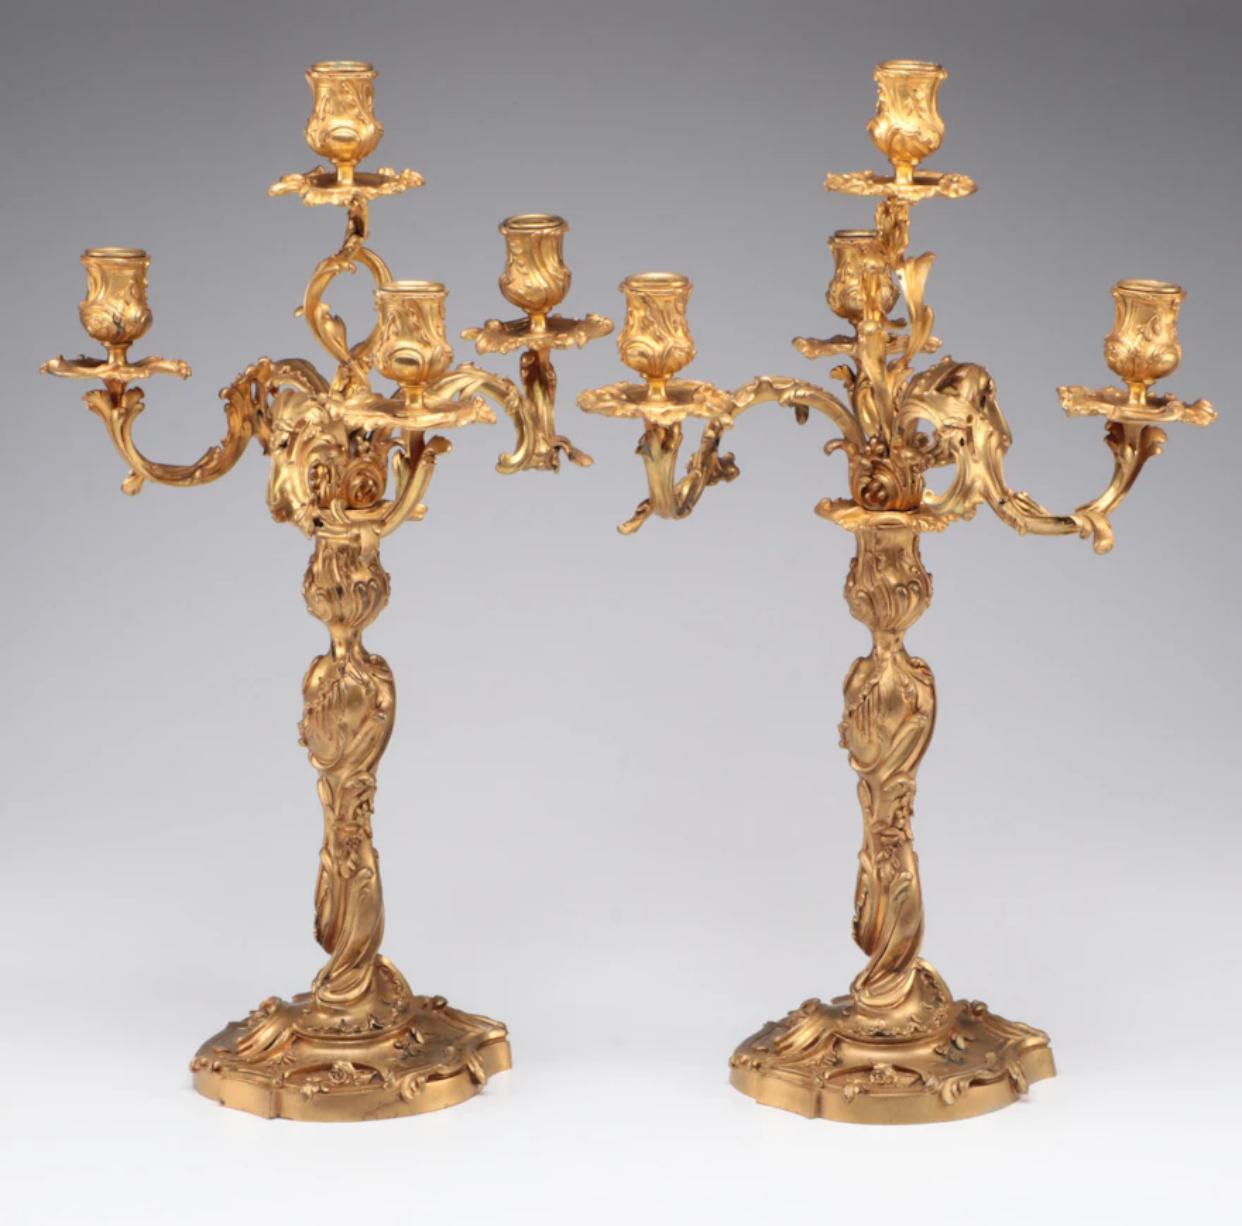 French Pair of Ravinet d'Enfert Louis XV Style Ormolu Candelabra, Early 20th C